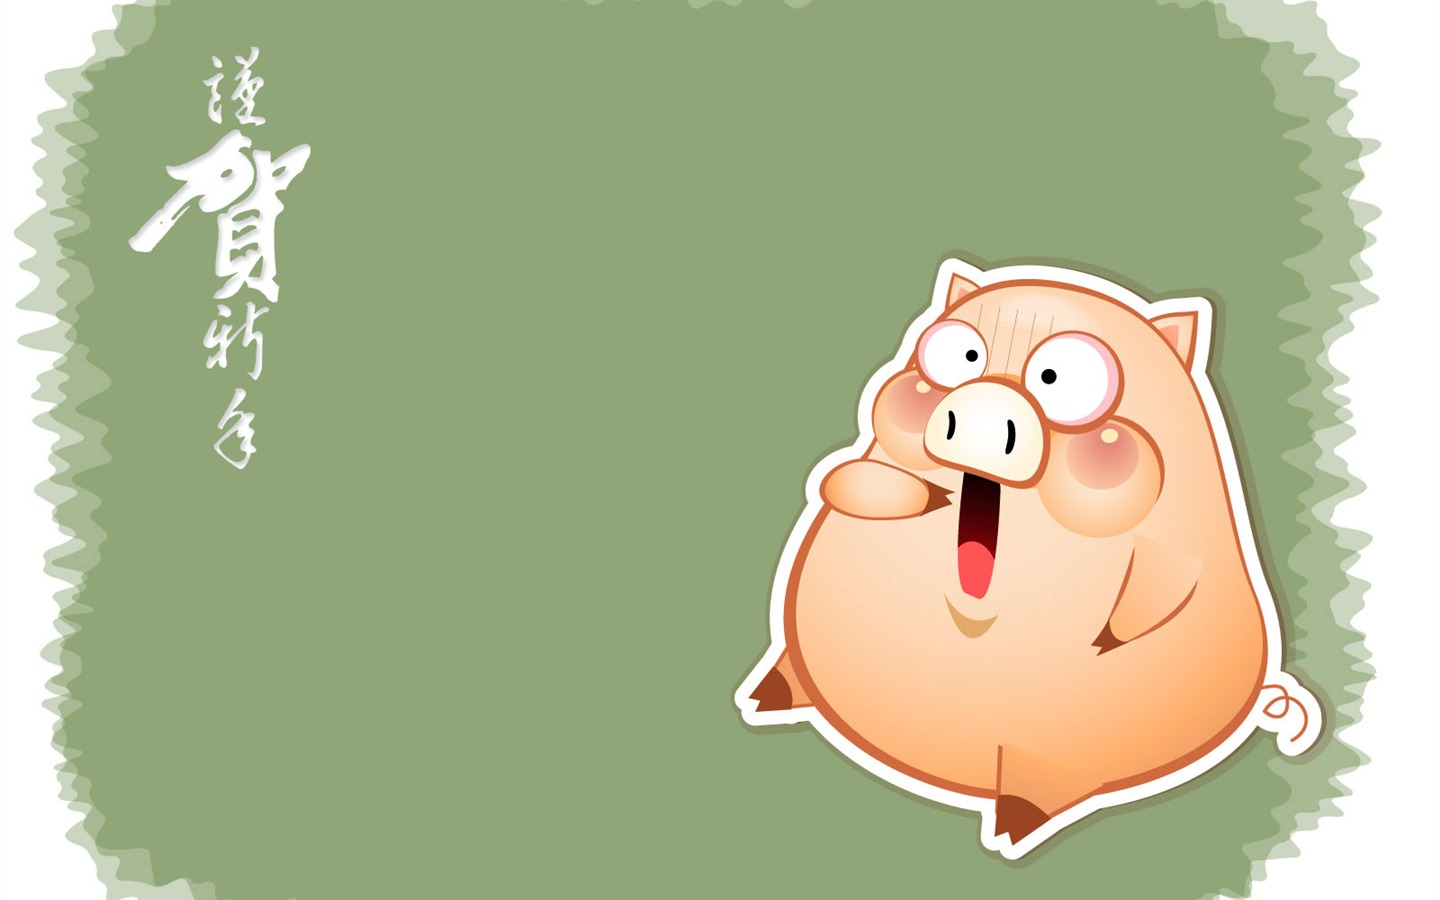 Year of the Pig Theme Wallpaper #12 - 1440x900